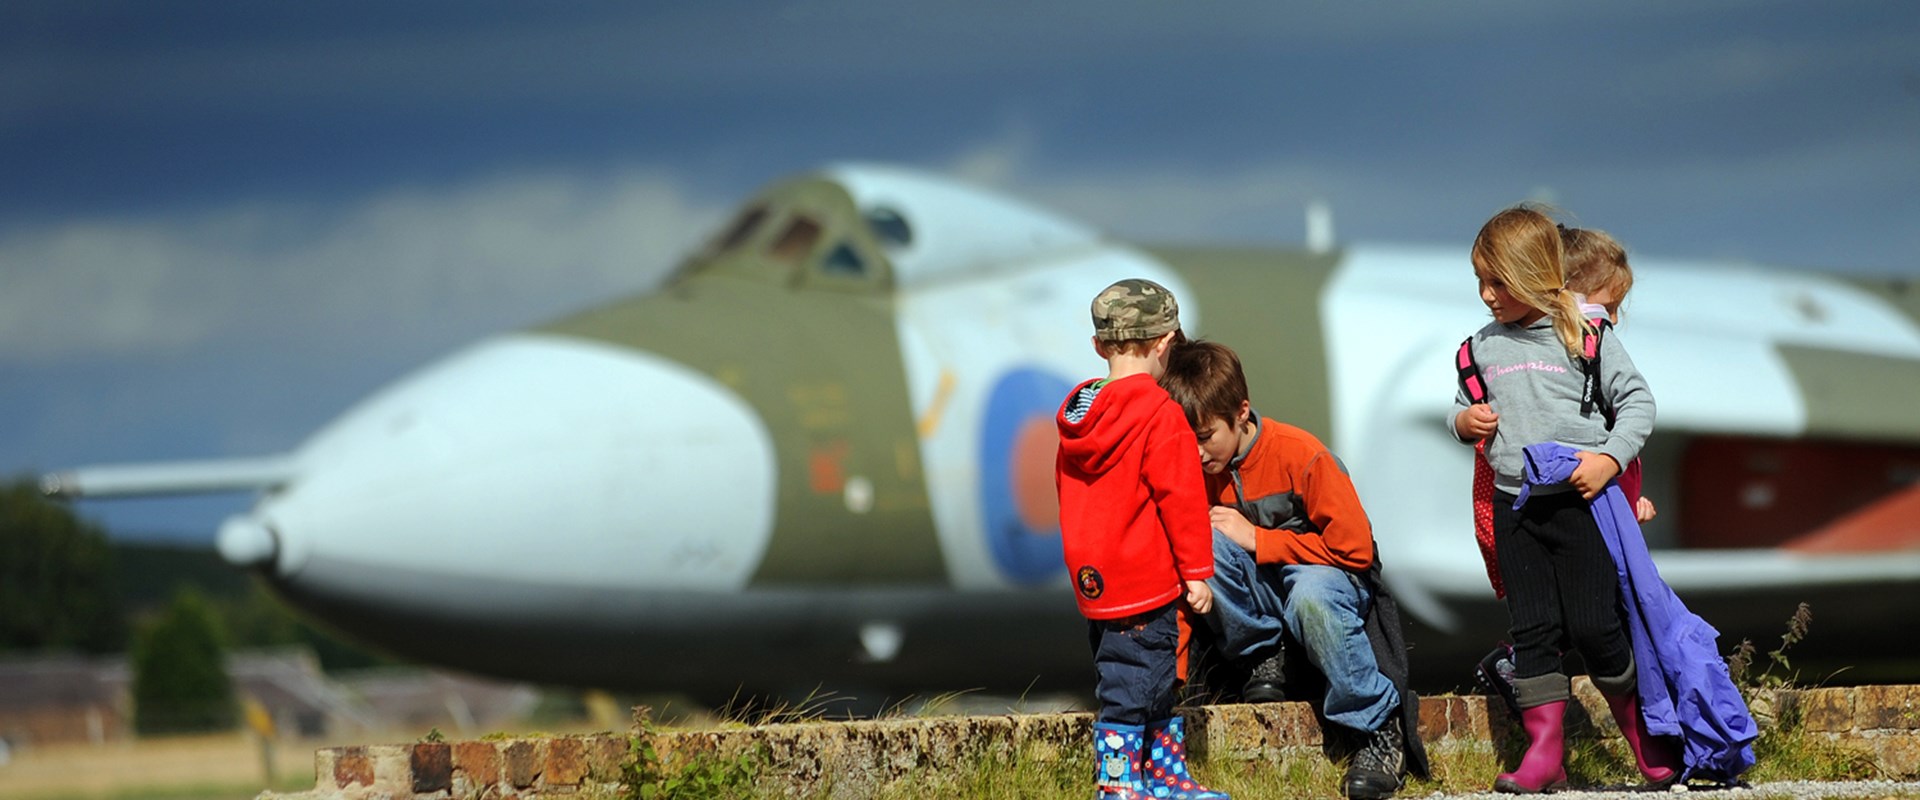 Children outside in front of the Vulcan airplane